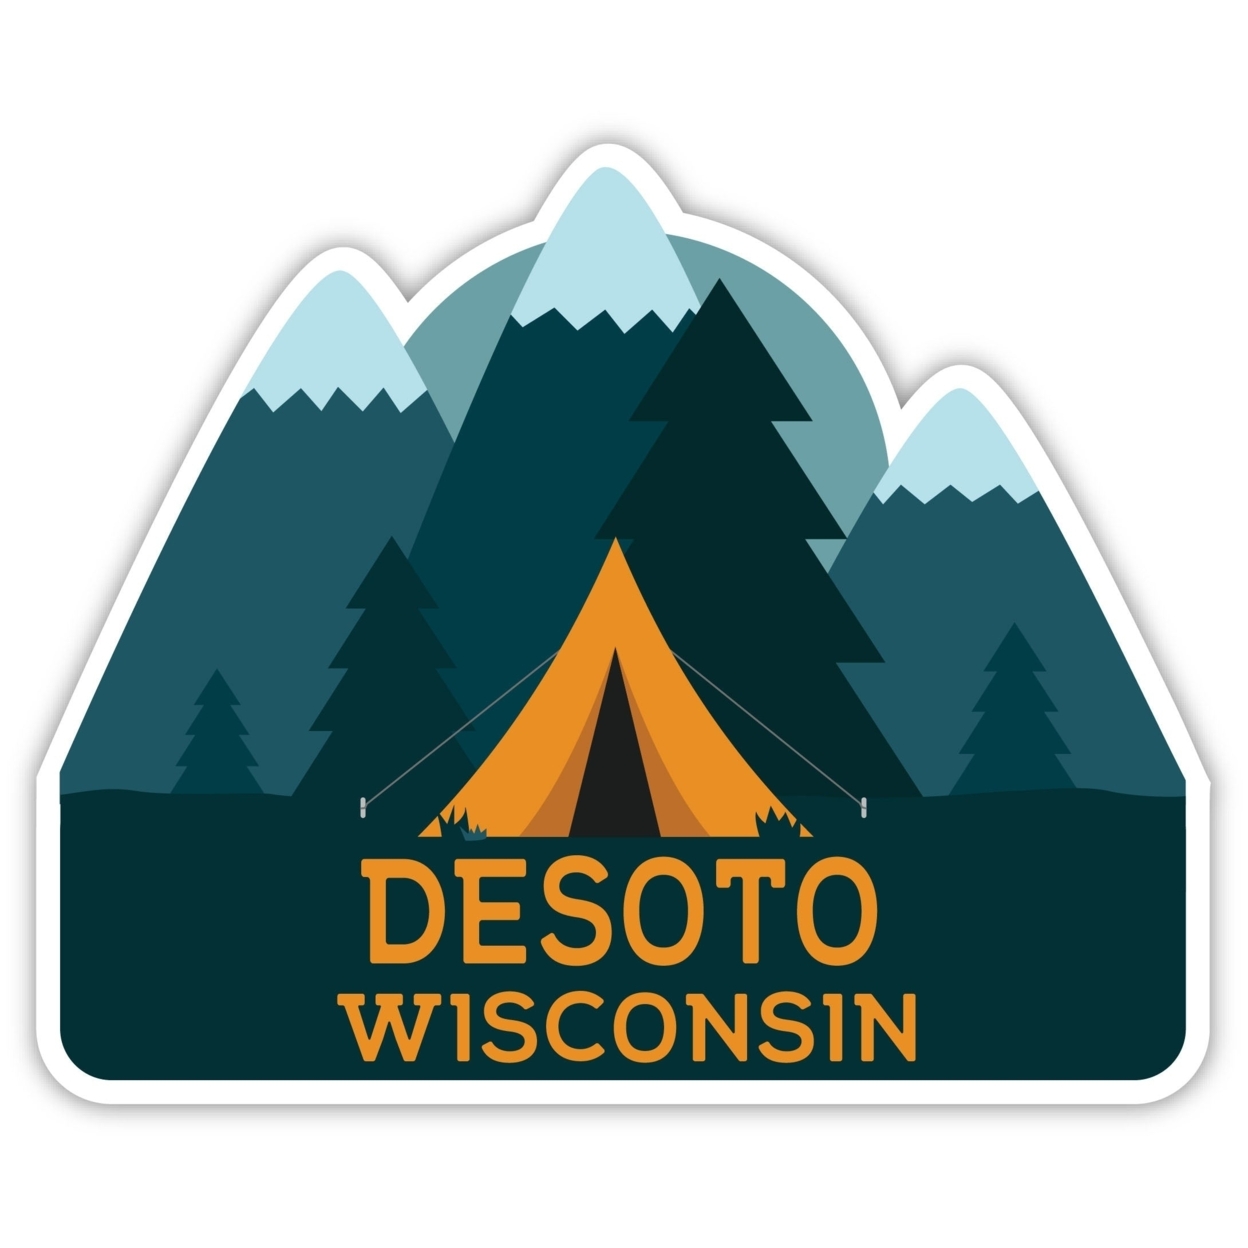 DeSoto Wisconsin Souvenir Decorative Stickers (Choose Theme And Size) - 4-Pack, 4-Inch, Tent